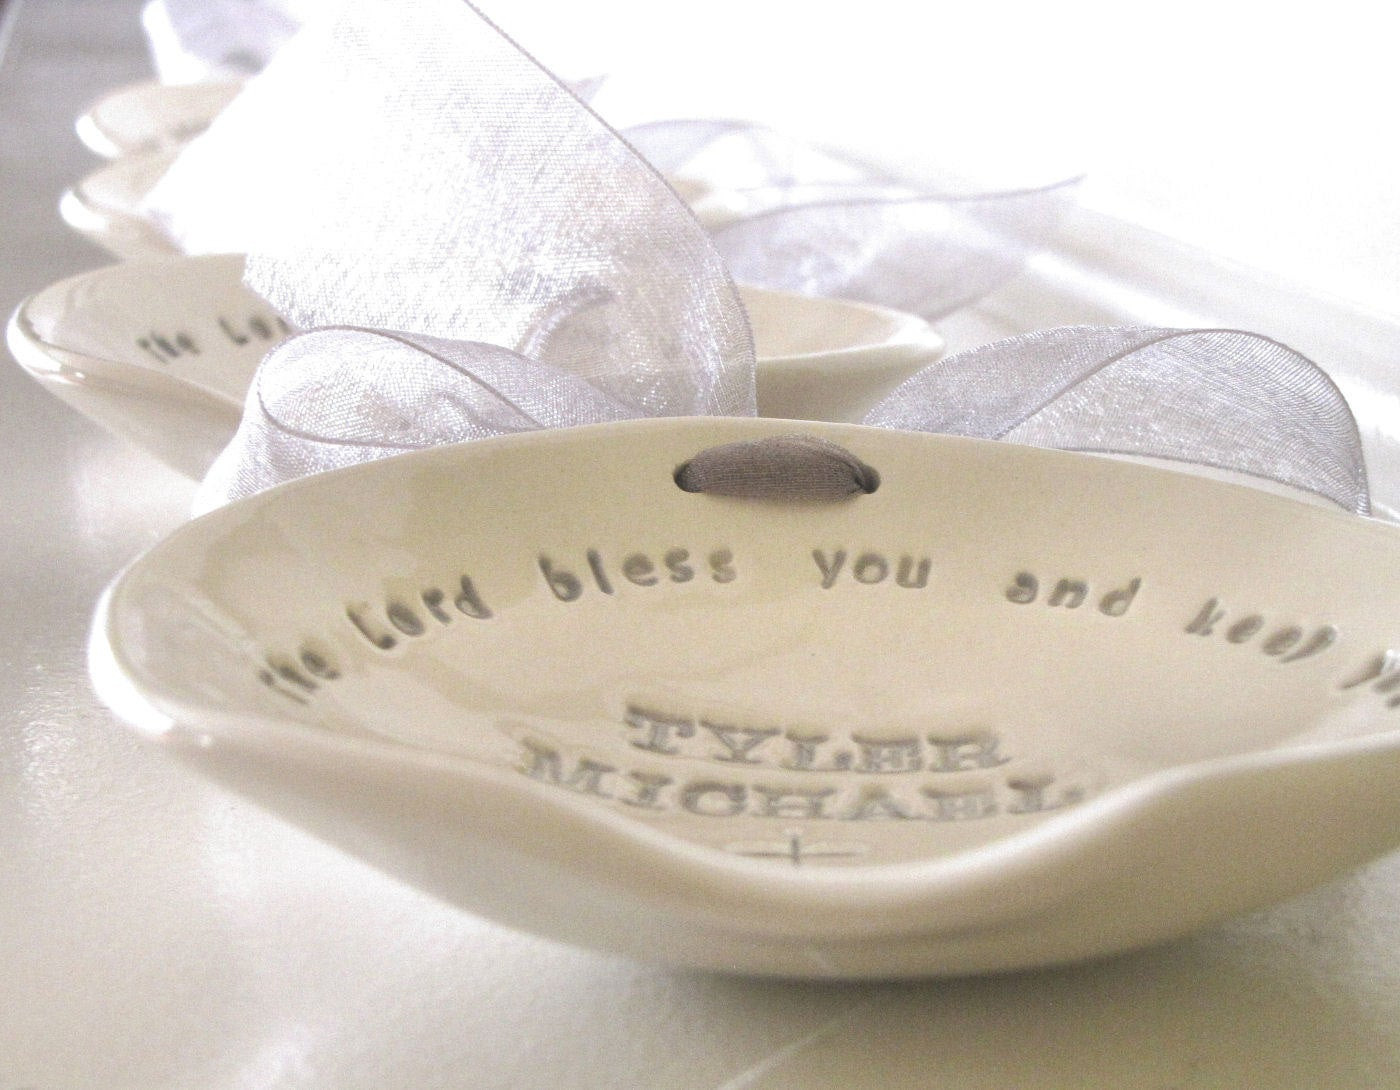 Boys Communion Gift Ideas
 The Best Christening Gift Ideas for Baby Boy – Home